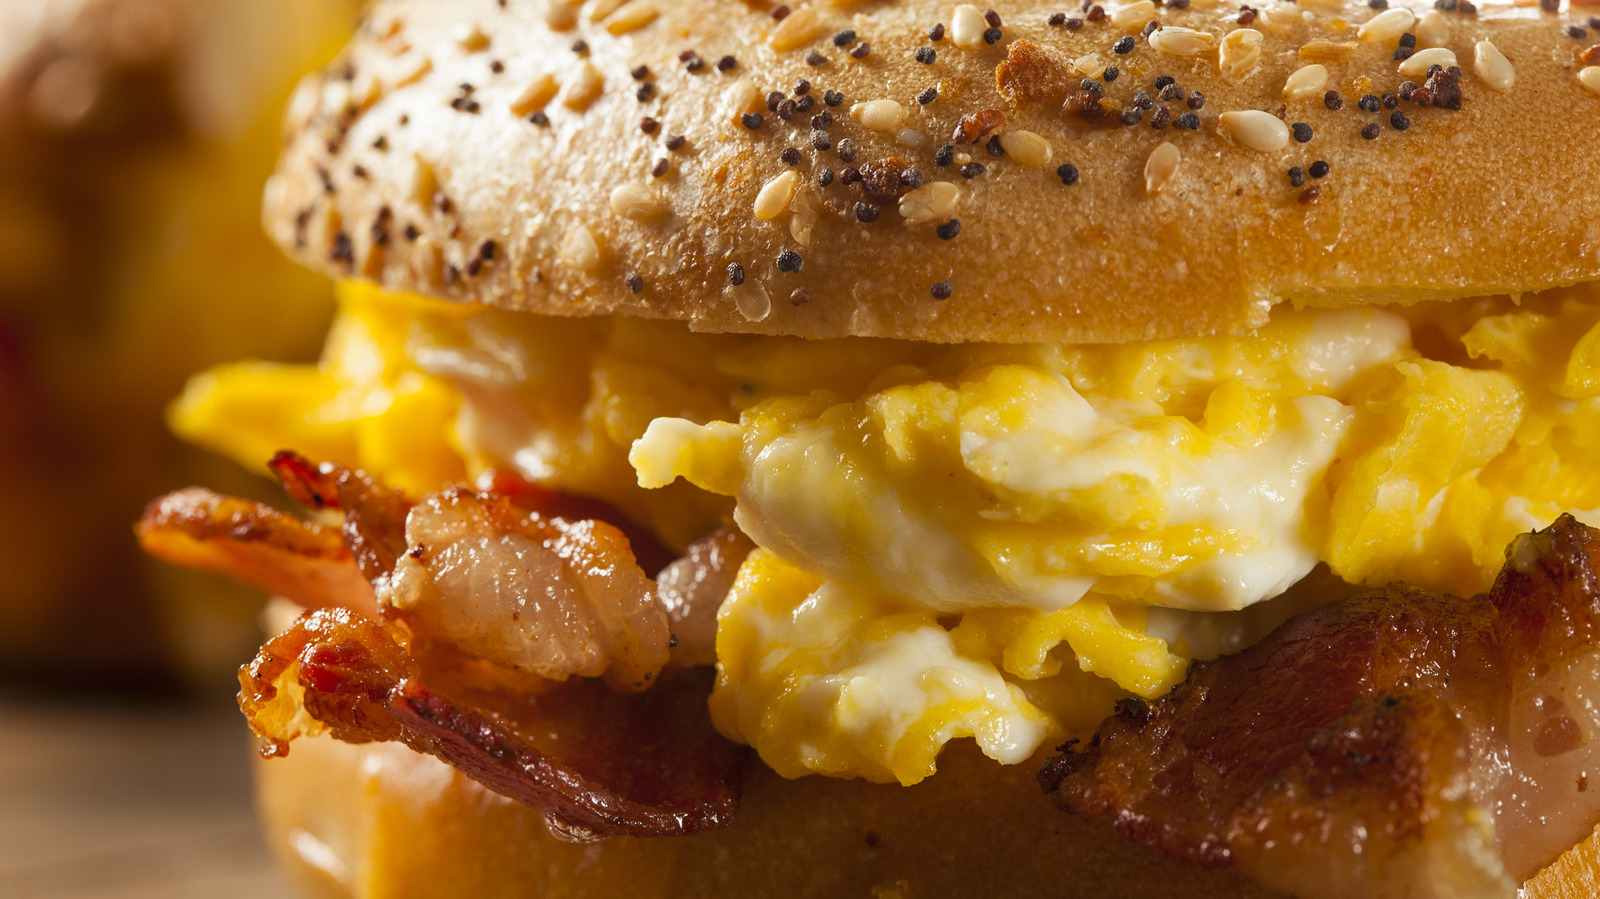 The Best Fast Food Breakfast Sandwiches Ranked